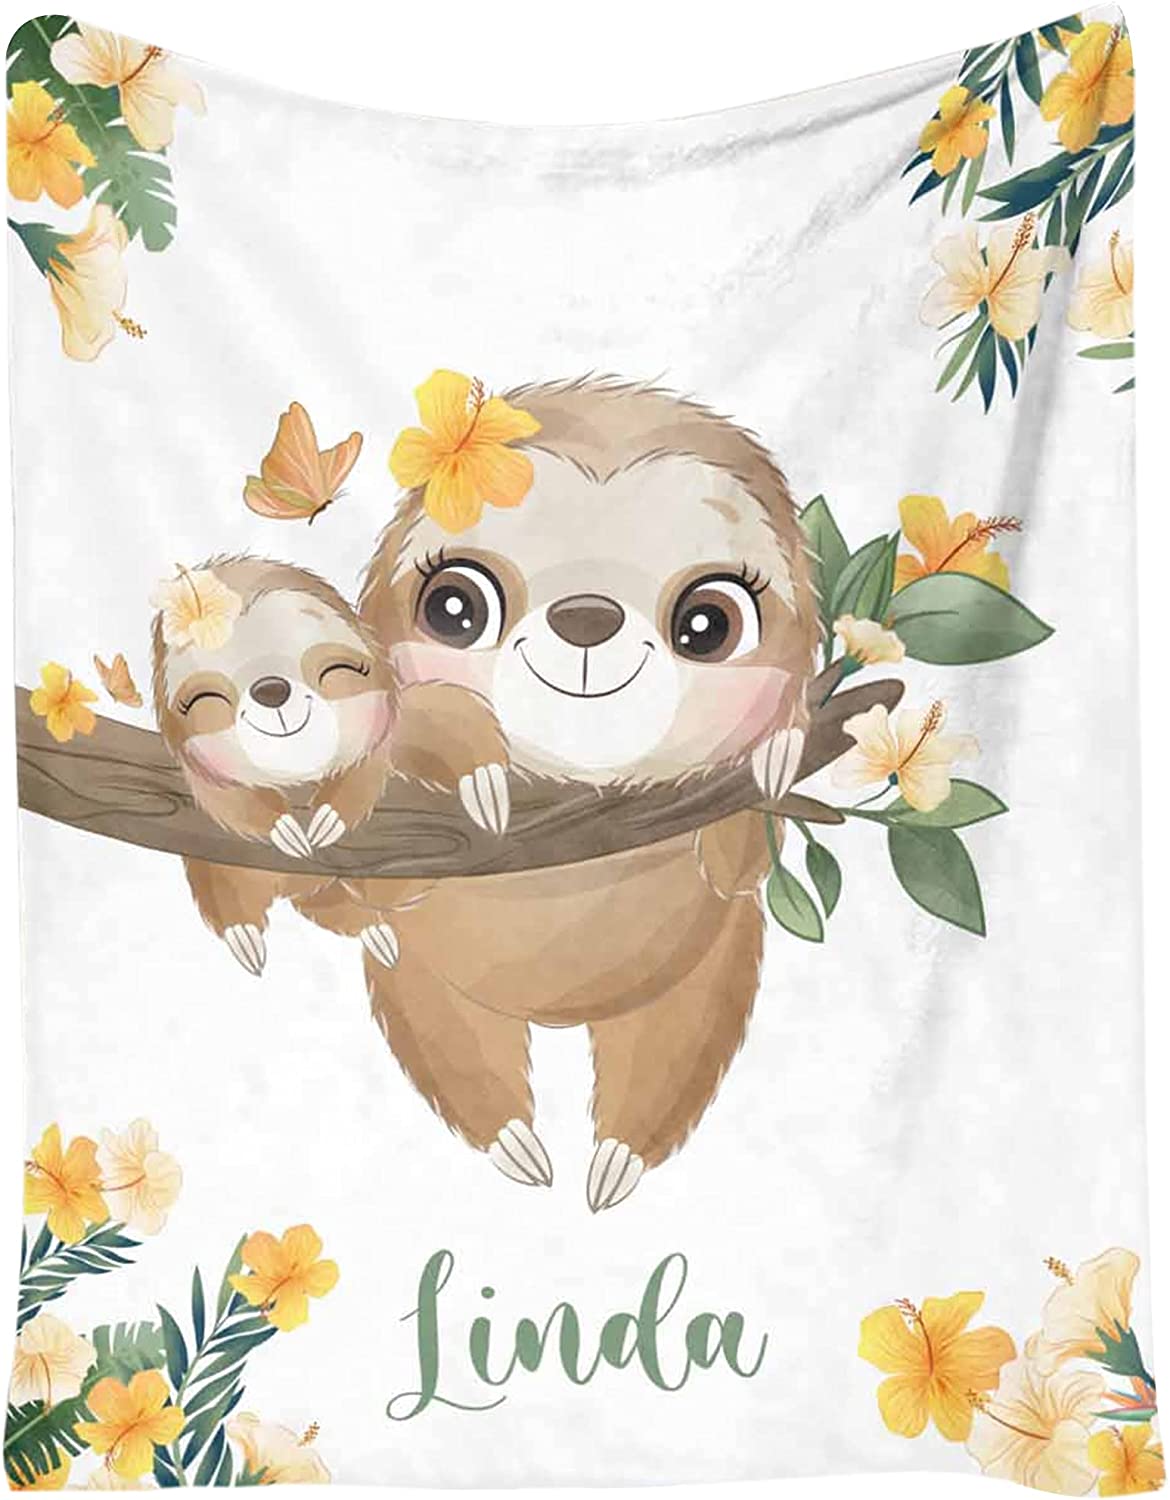 Personalized Baby Blankets with Sloth Design for Kids - Throw Blanket with Cute Animal - Swadding Blanket for Toddler